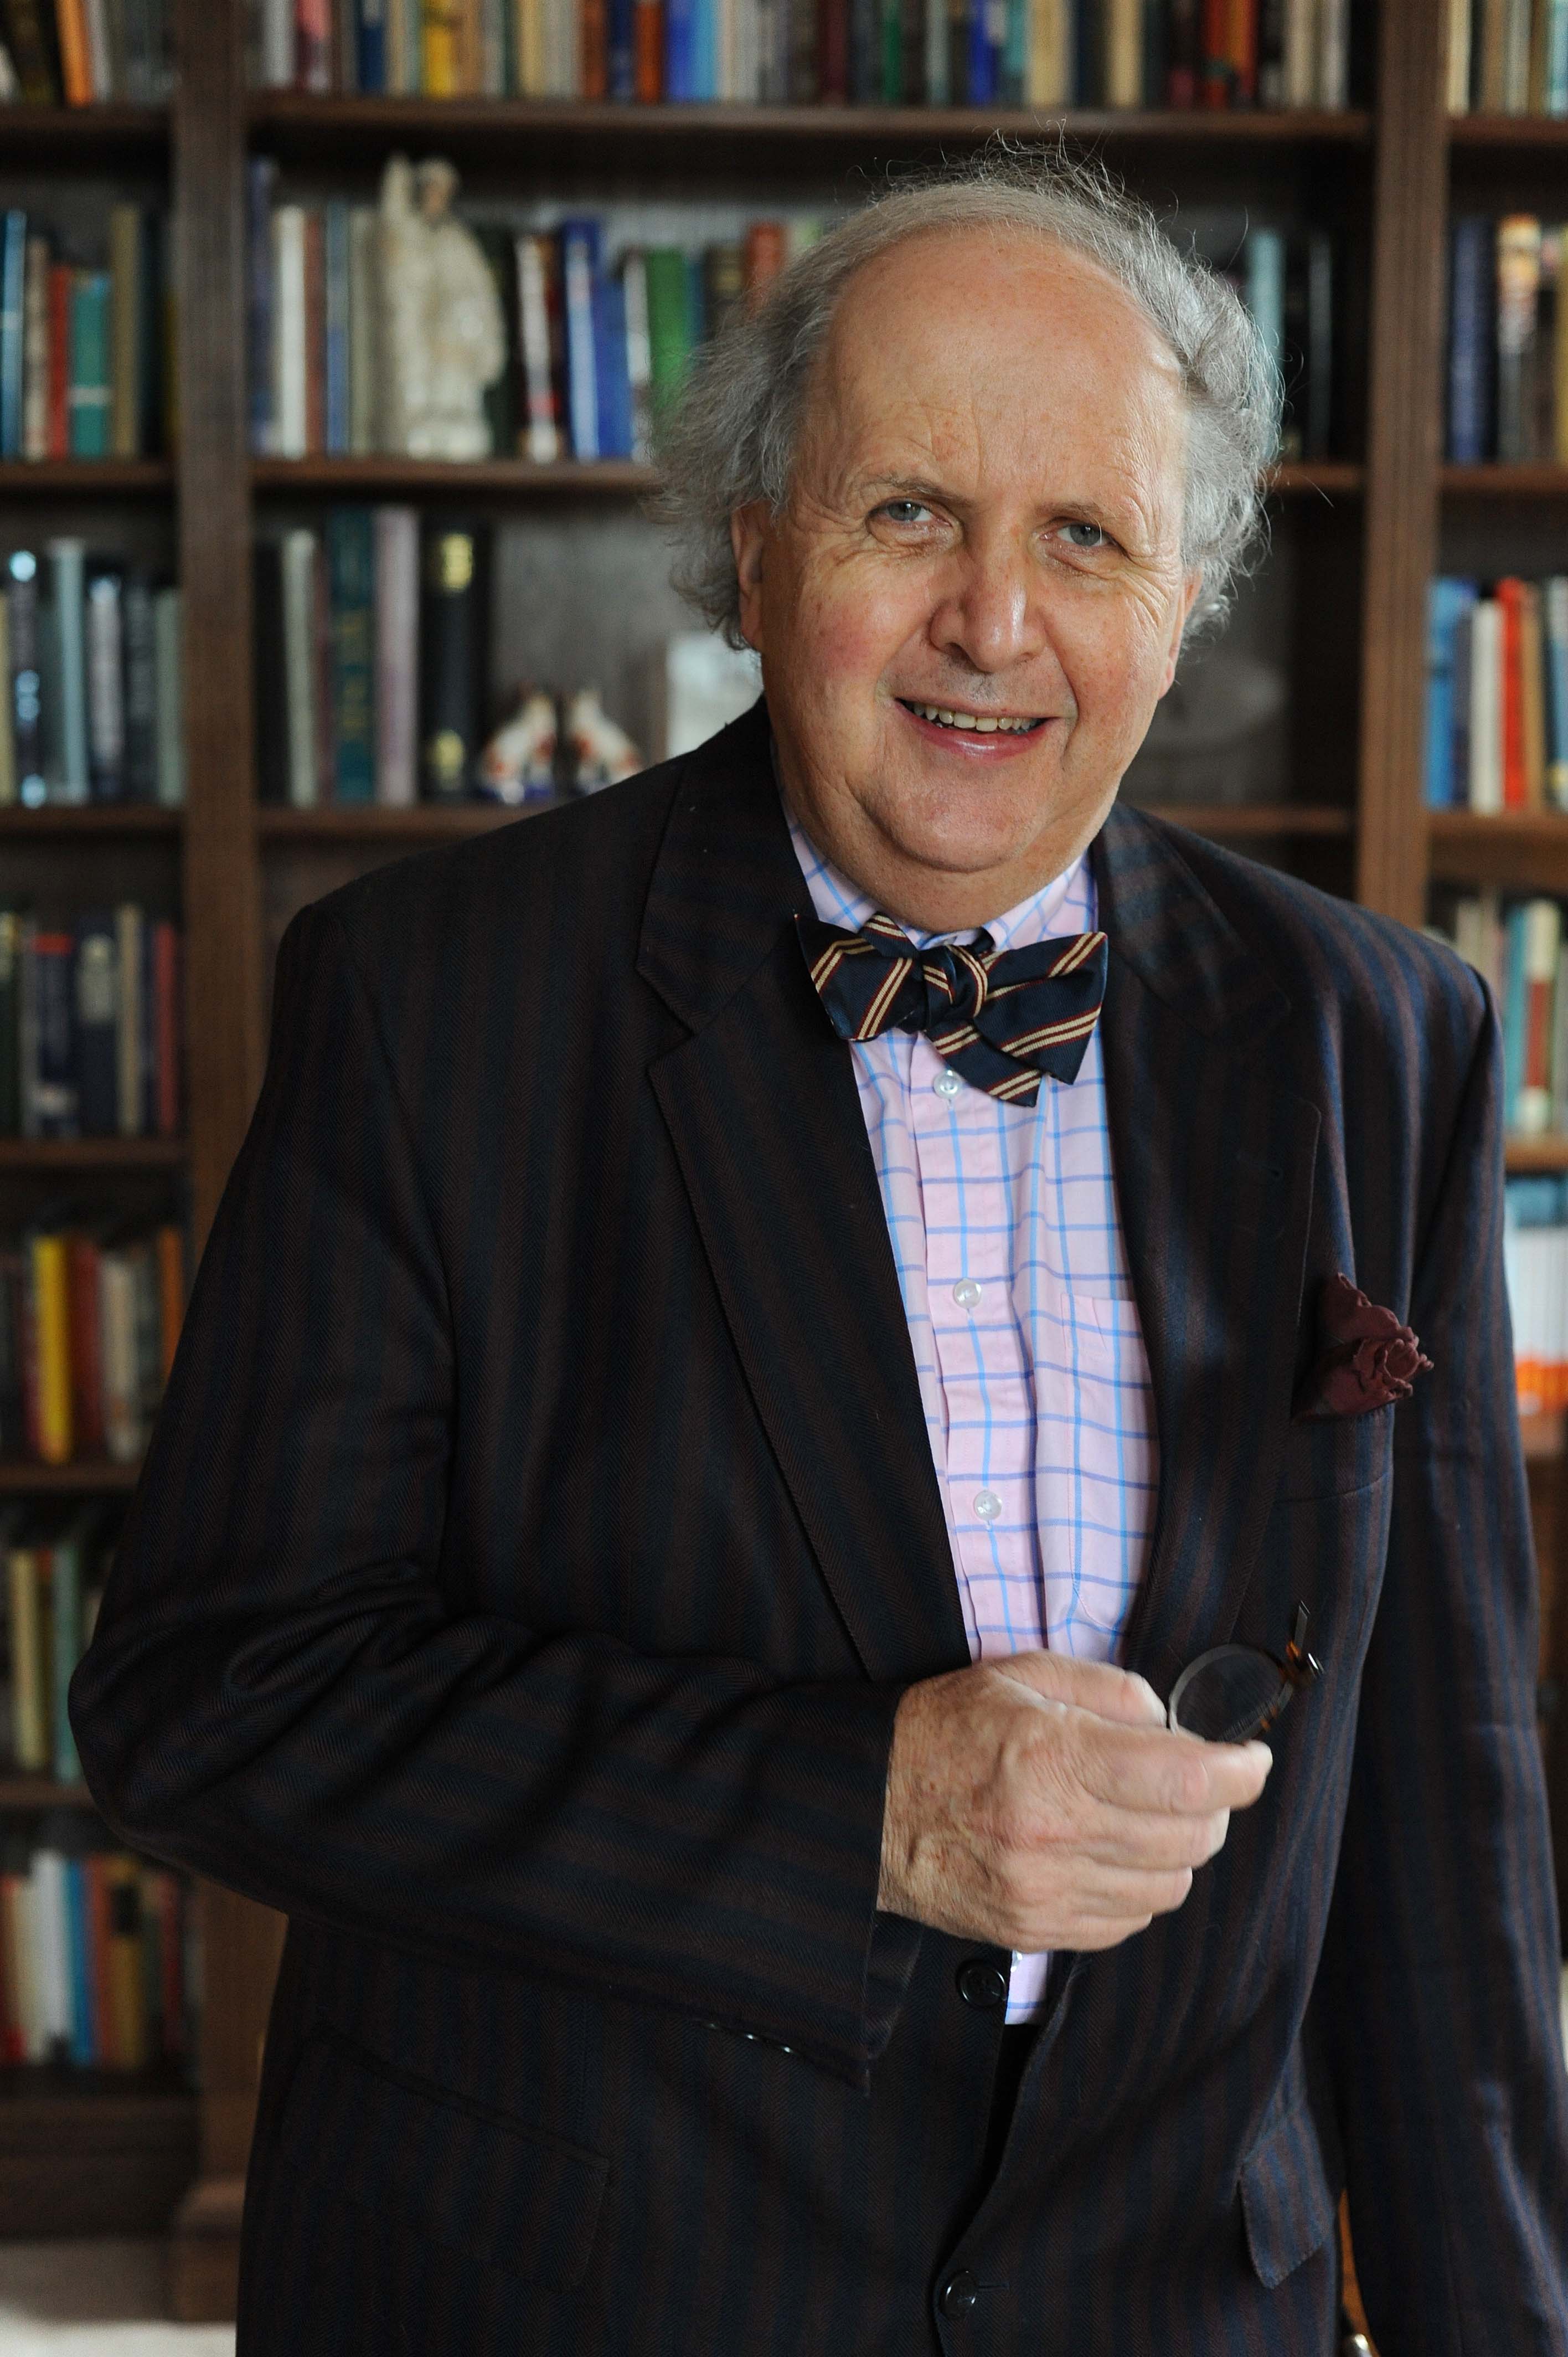 What are some popular books by Alexander McCall Smith?